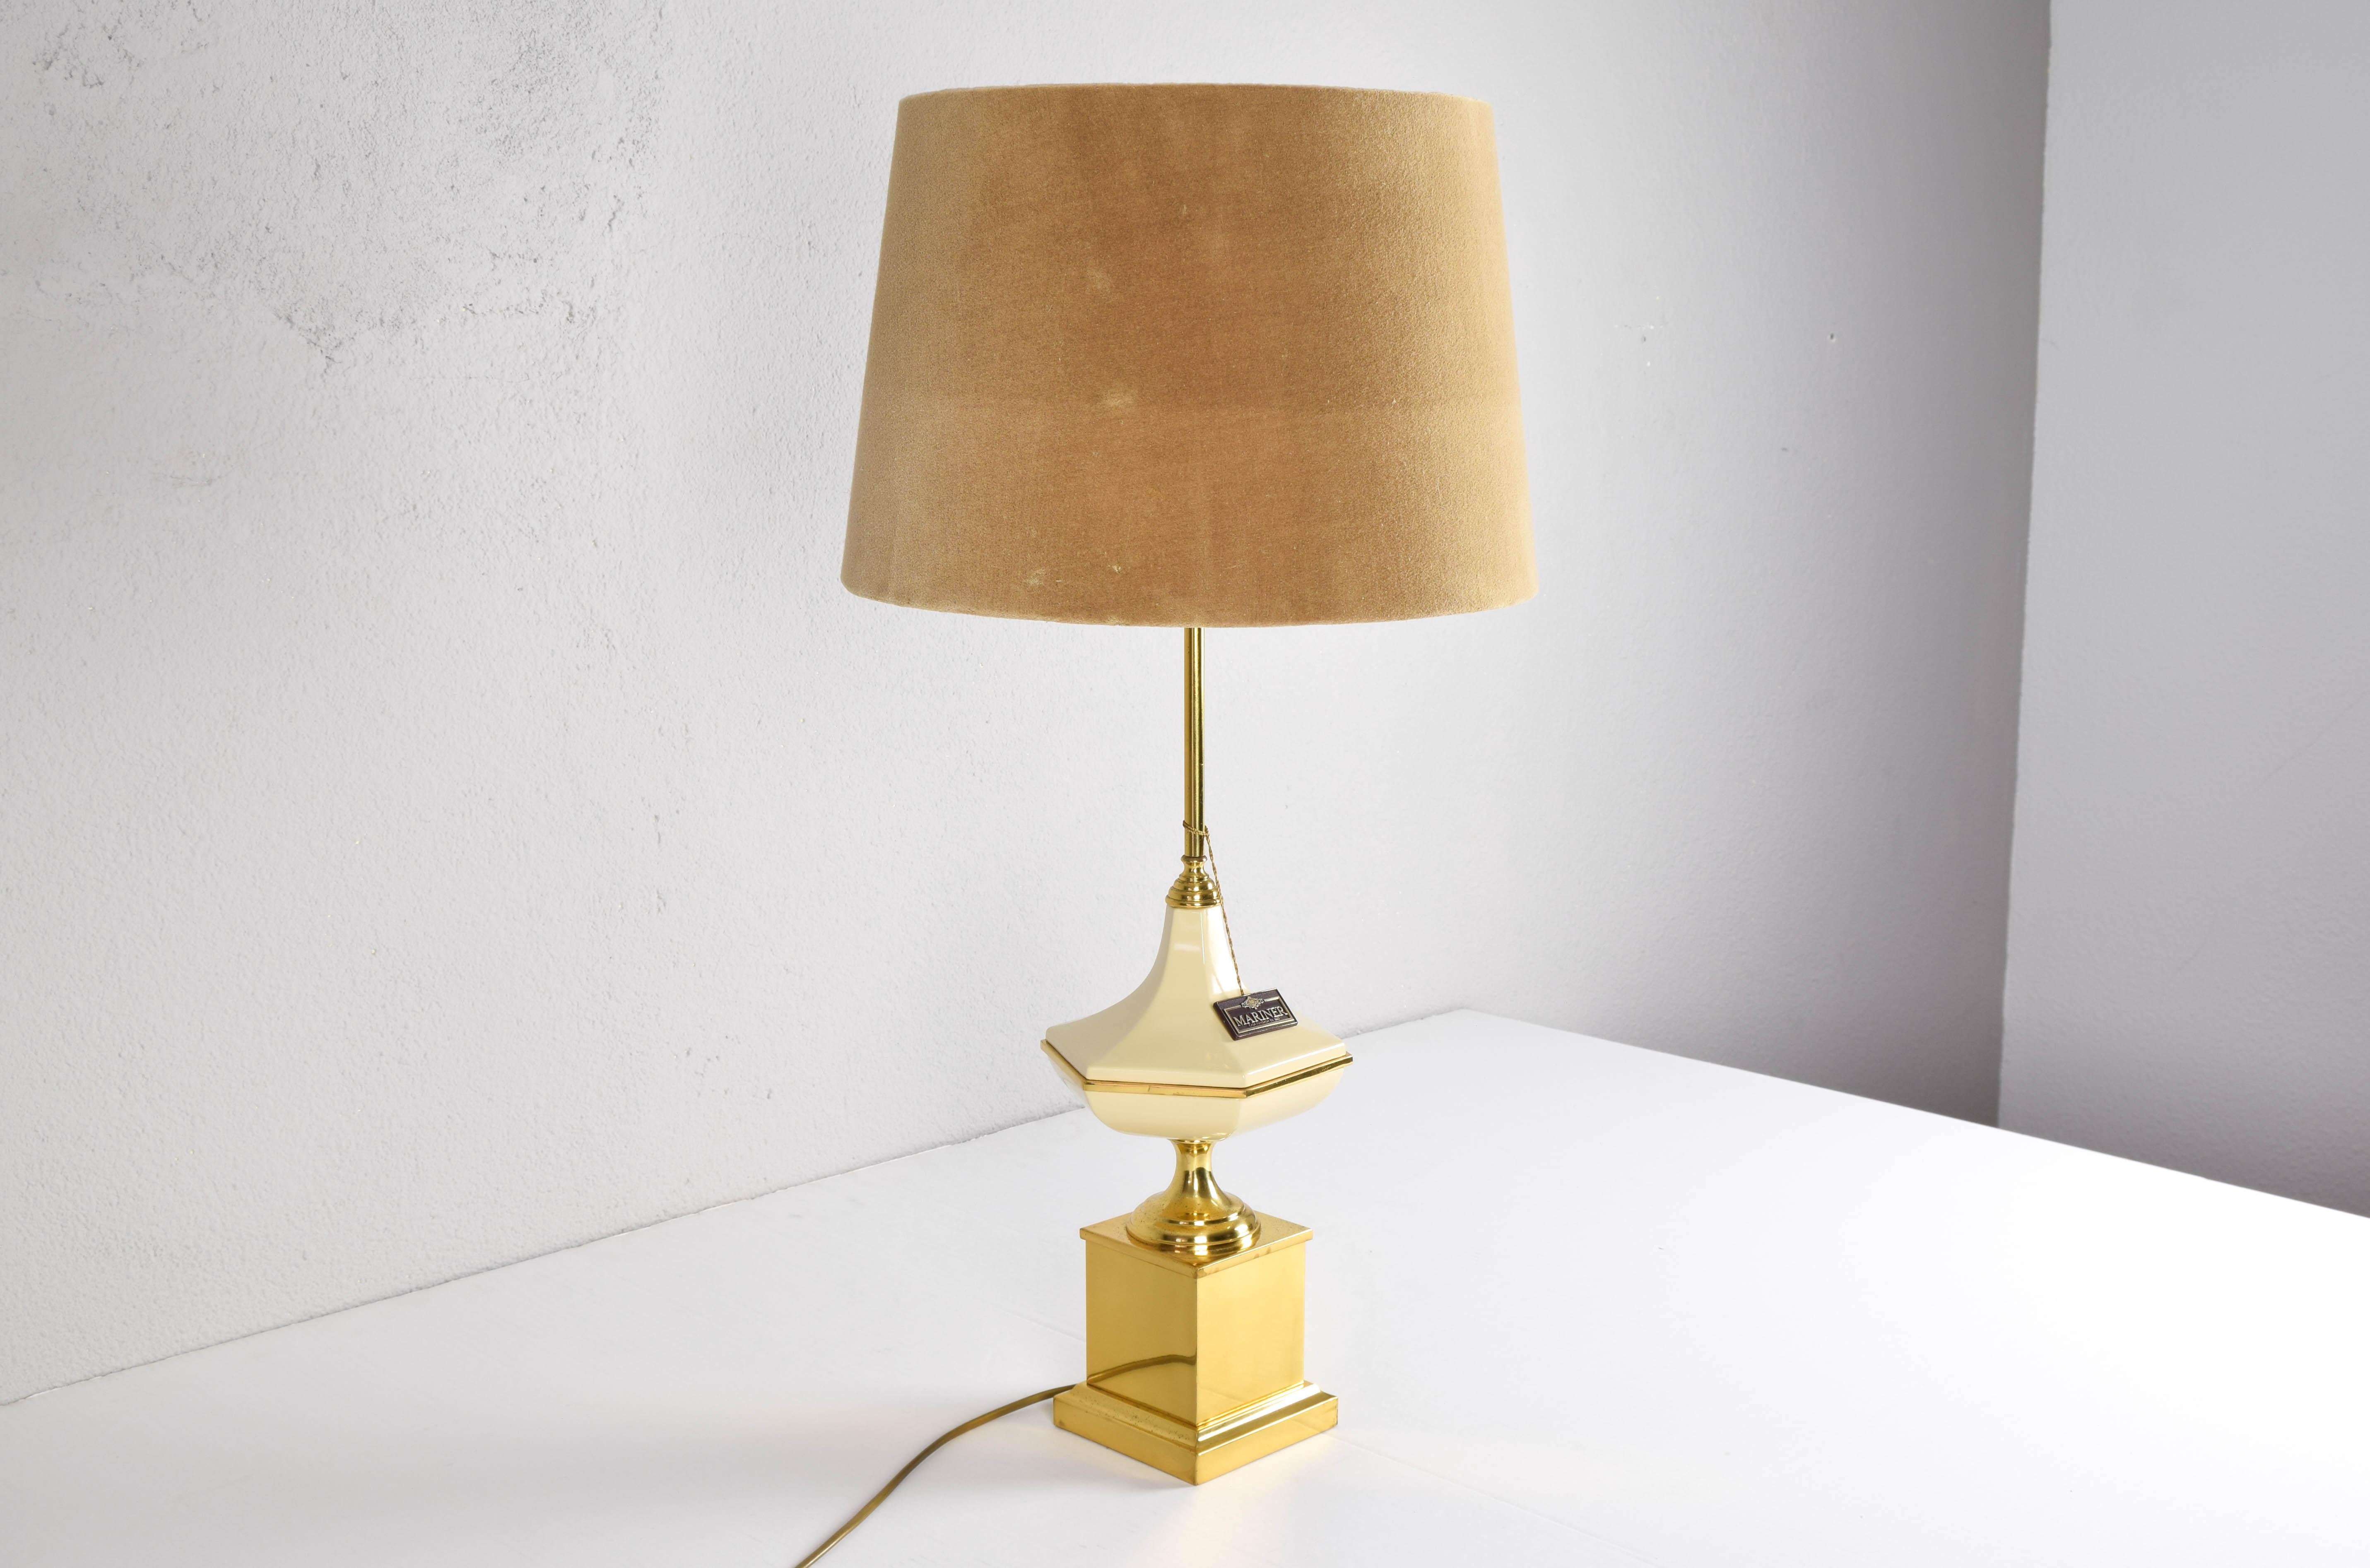 Very elegant and beautiful table lamp of the very prestigious Mariner brand made in Spain in the 70s.
Brass-plated steel body on its cubic base and ivory-lacquered hexagonal figure.
Mariner is a guarantee of sophistication and exclusivity.
The